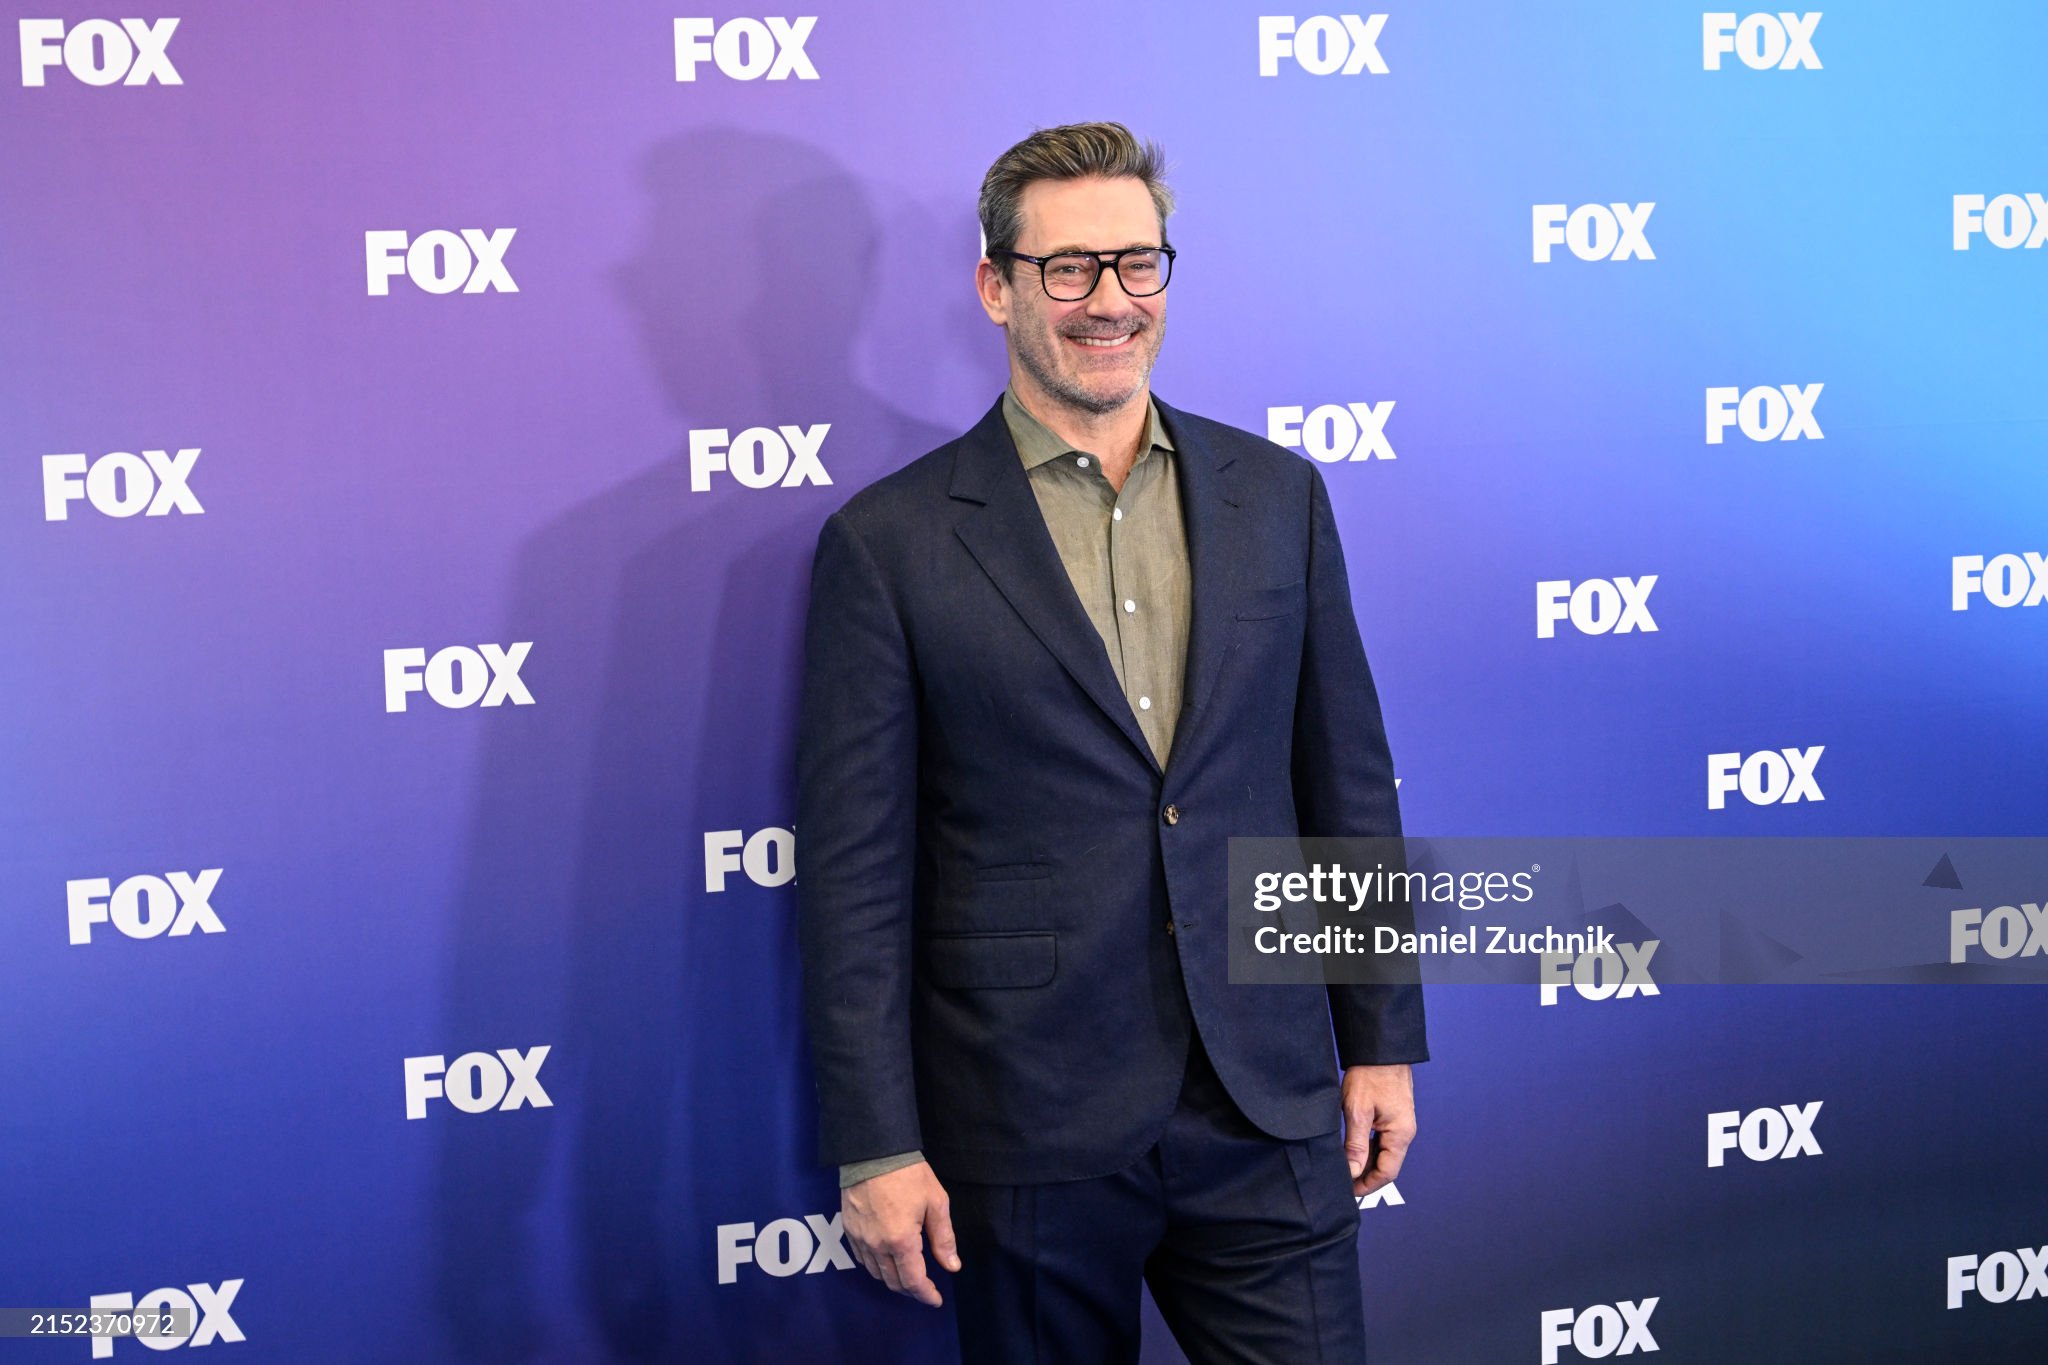 gettyimages-2152370972-2048x2048.jpg